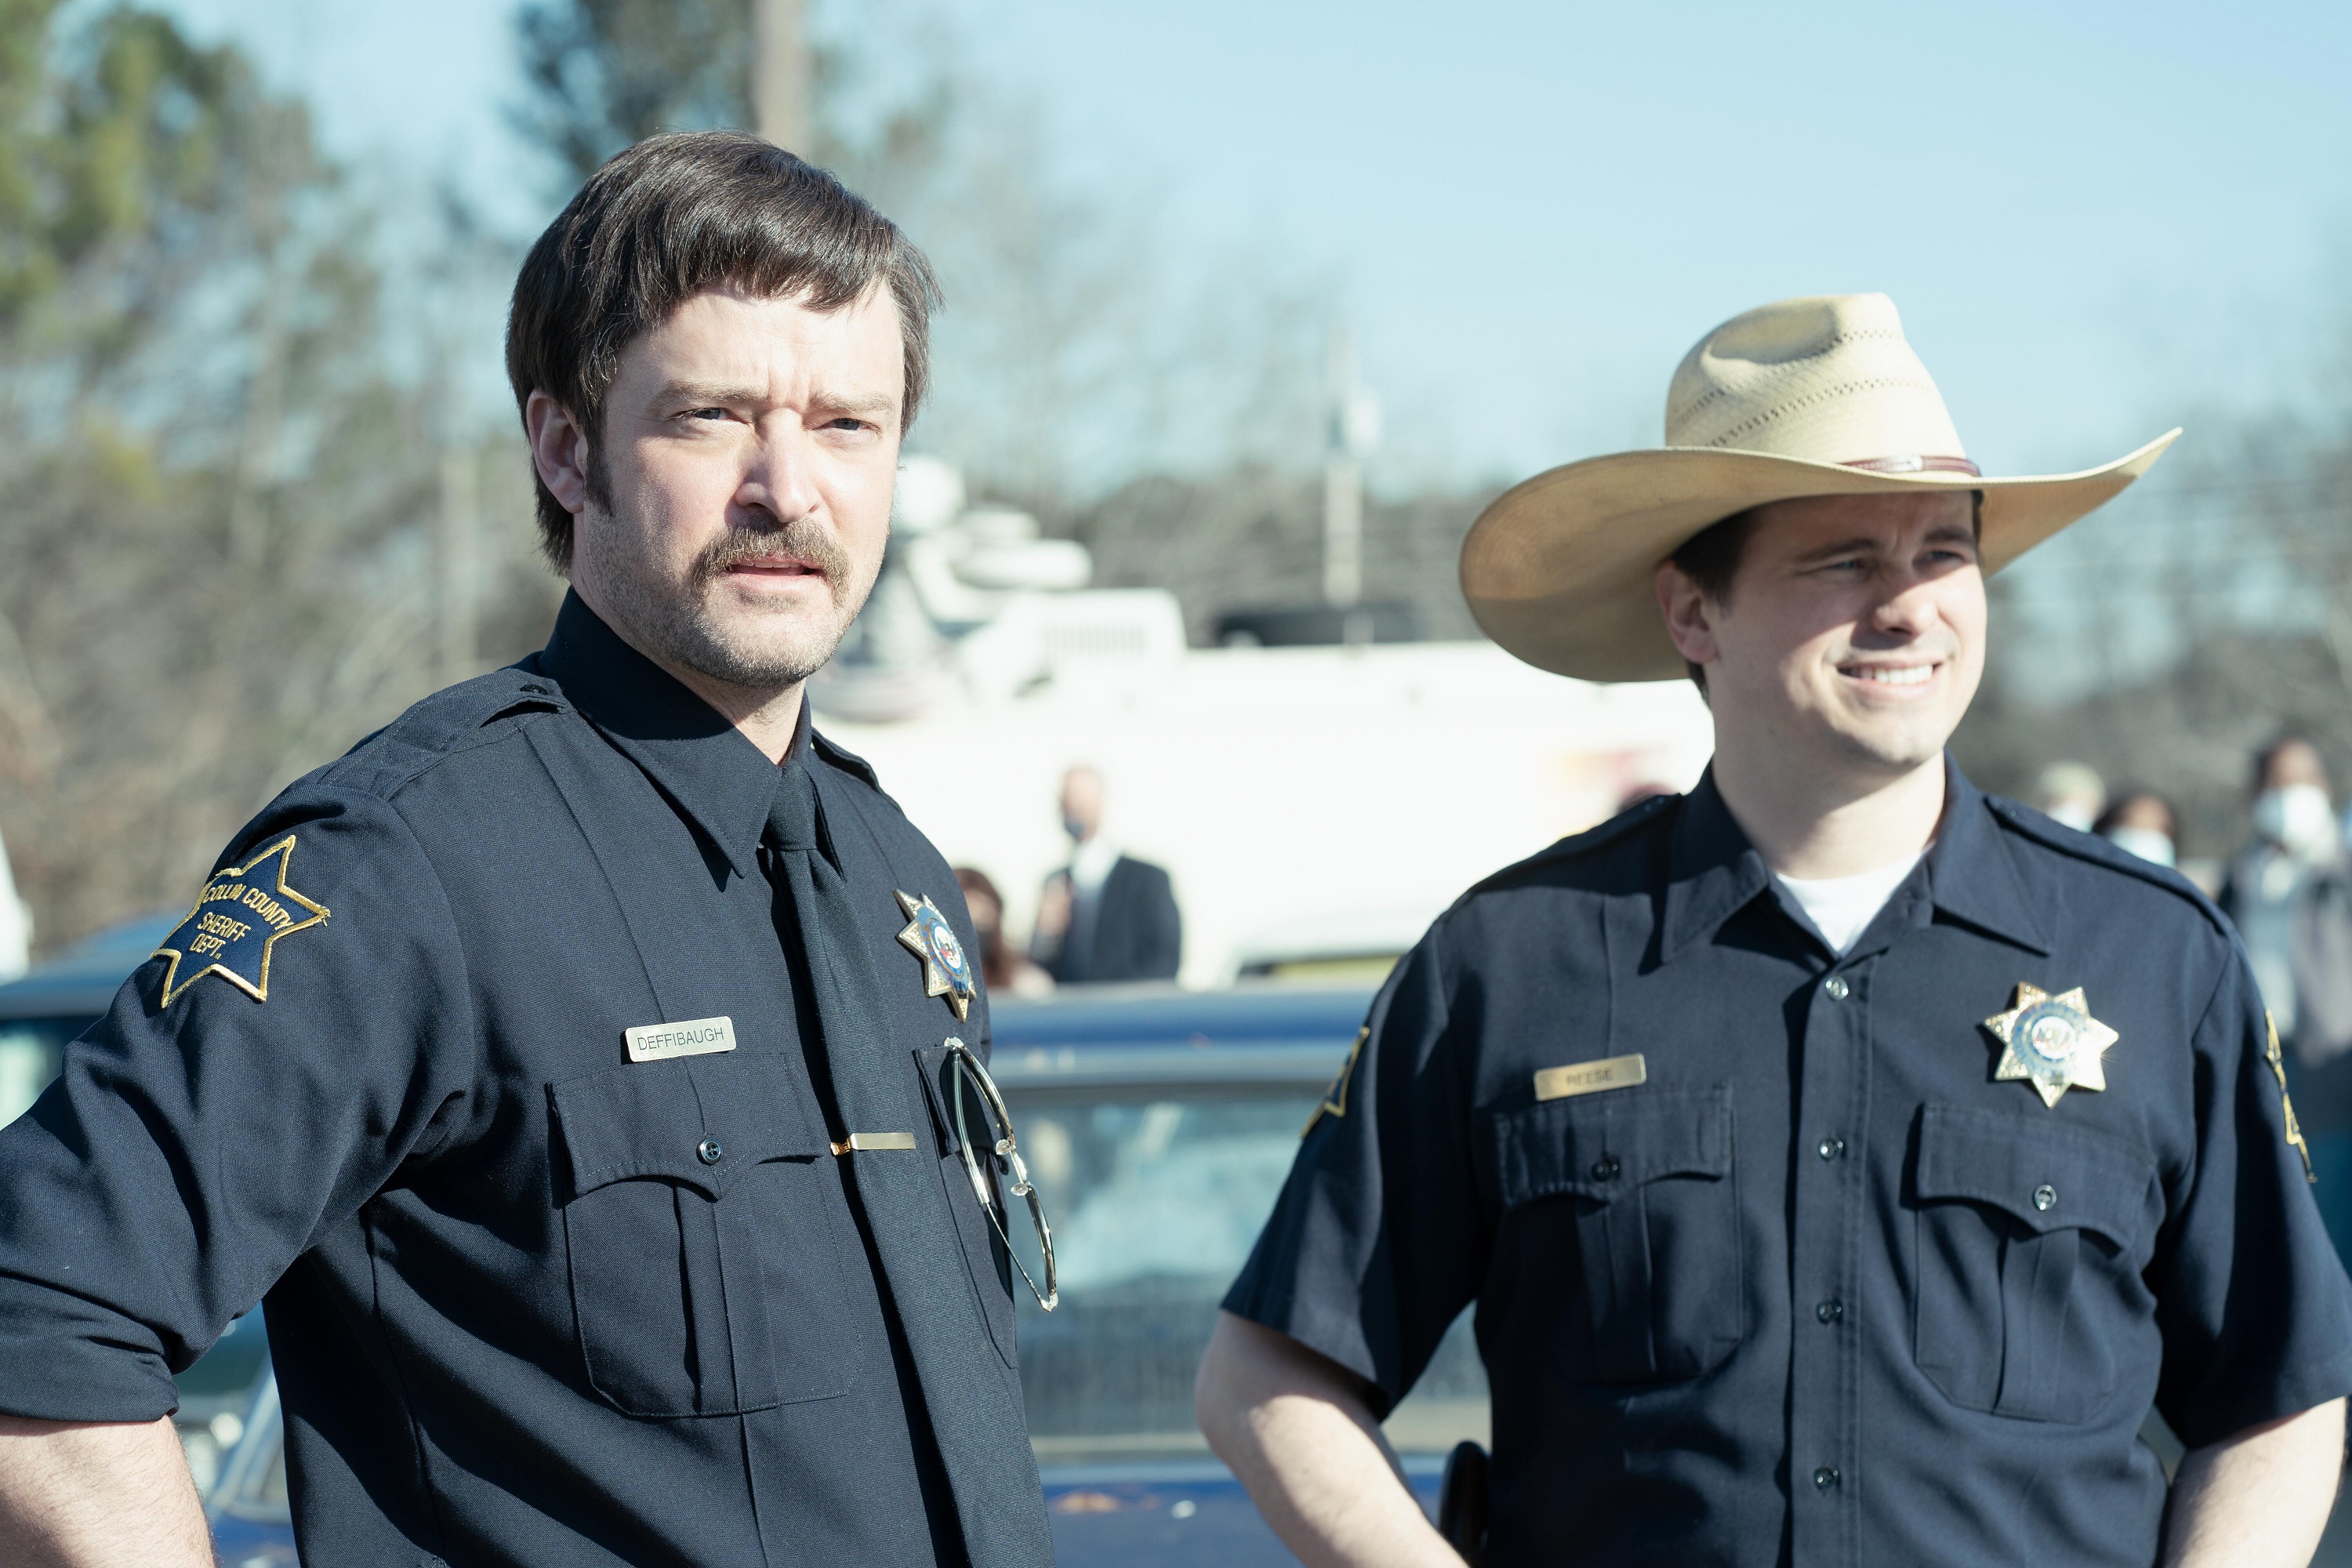 'Candy' cast members Justin Timberlake as Steve Deffibaugh and Jason Ritter as Deputy Denny Reese standing together as cops